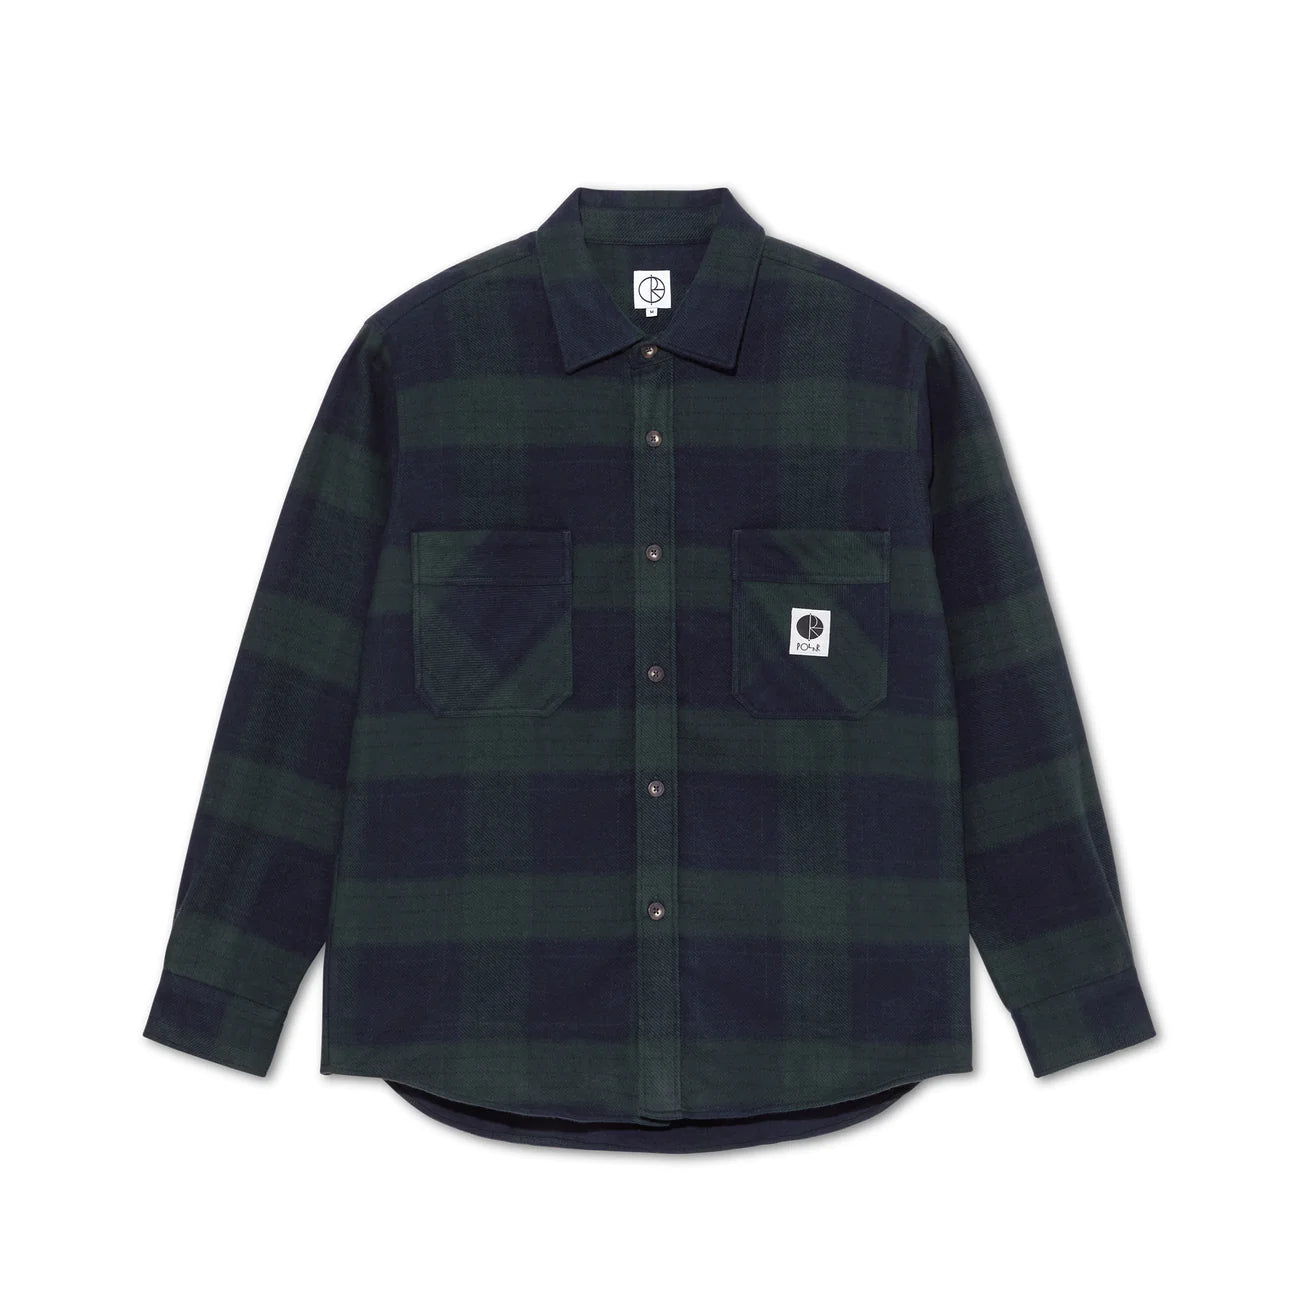 Mike L/S Flannel Shirt Nvy/Teal(size options listed)